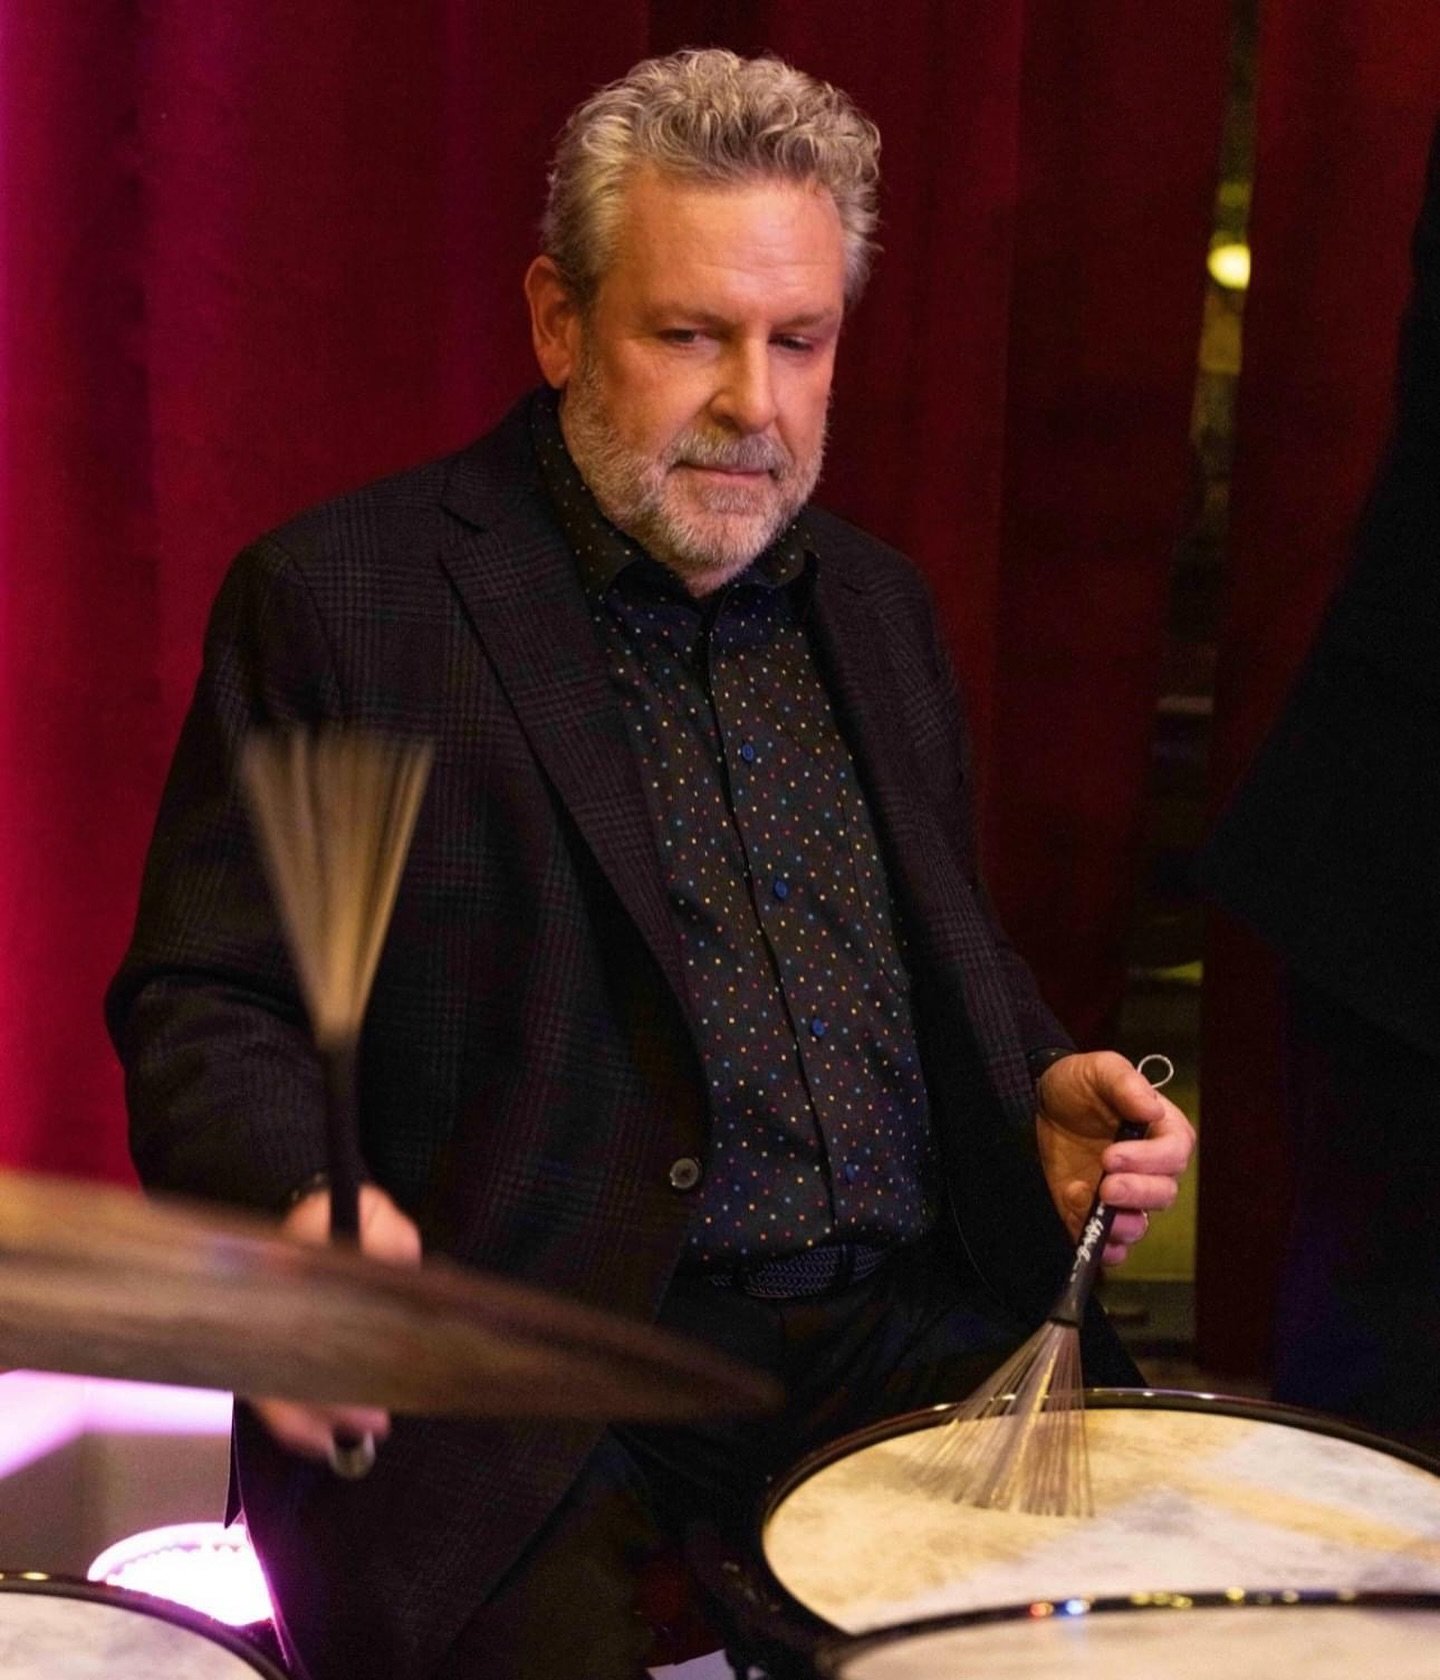 One of the most highly regarded drummers on the planet, Jeff Hamilton is a dynamic bandleader and top tier jazz musician of incredible pedigree. Featuring pianist Tamir Hendelman and bassist Jon Hamar, the Jeff Hamilton Trio is widely considered to b